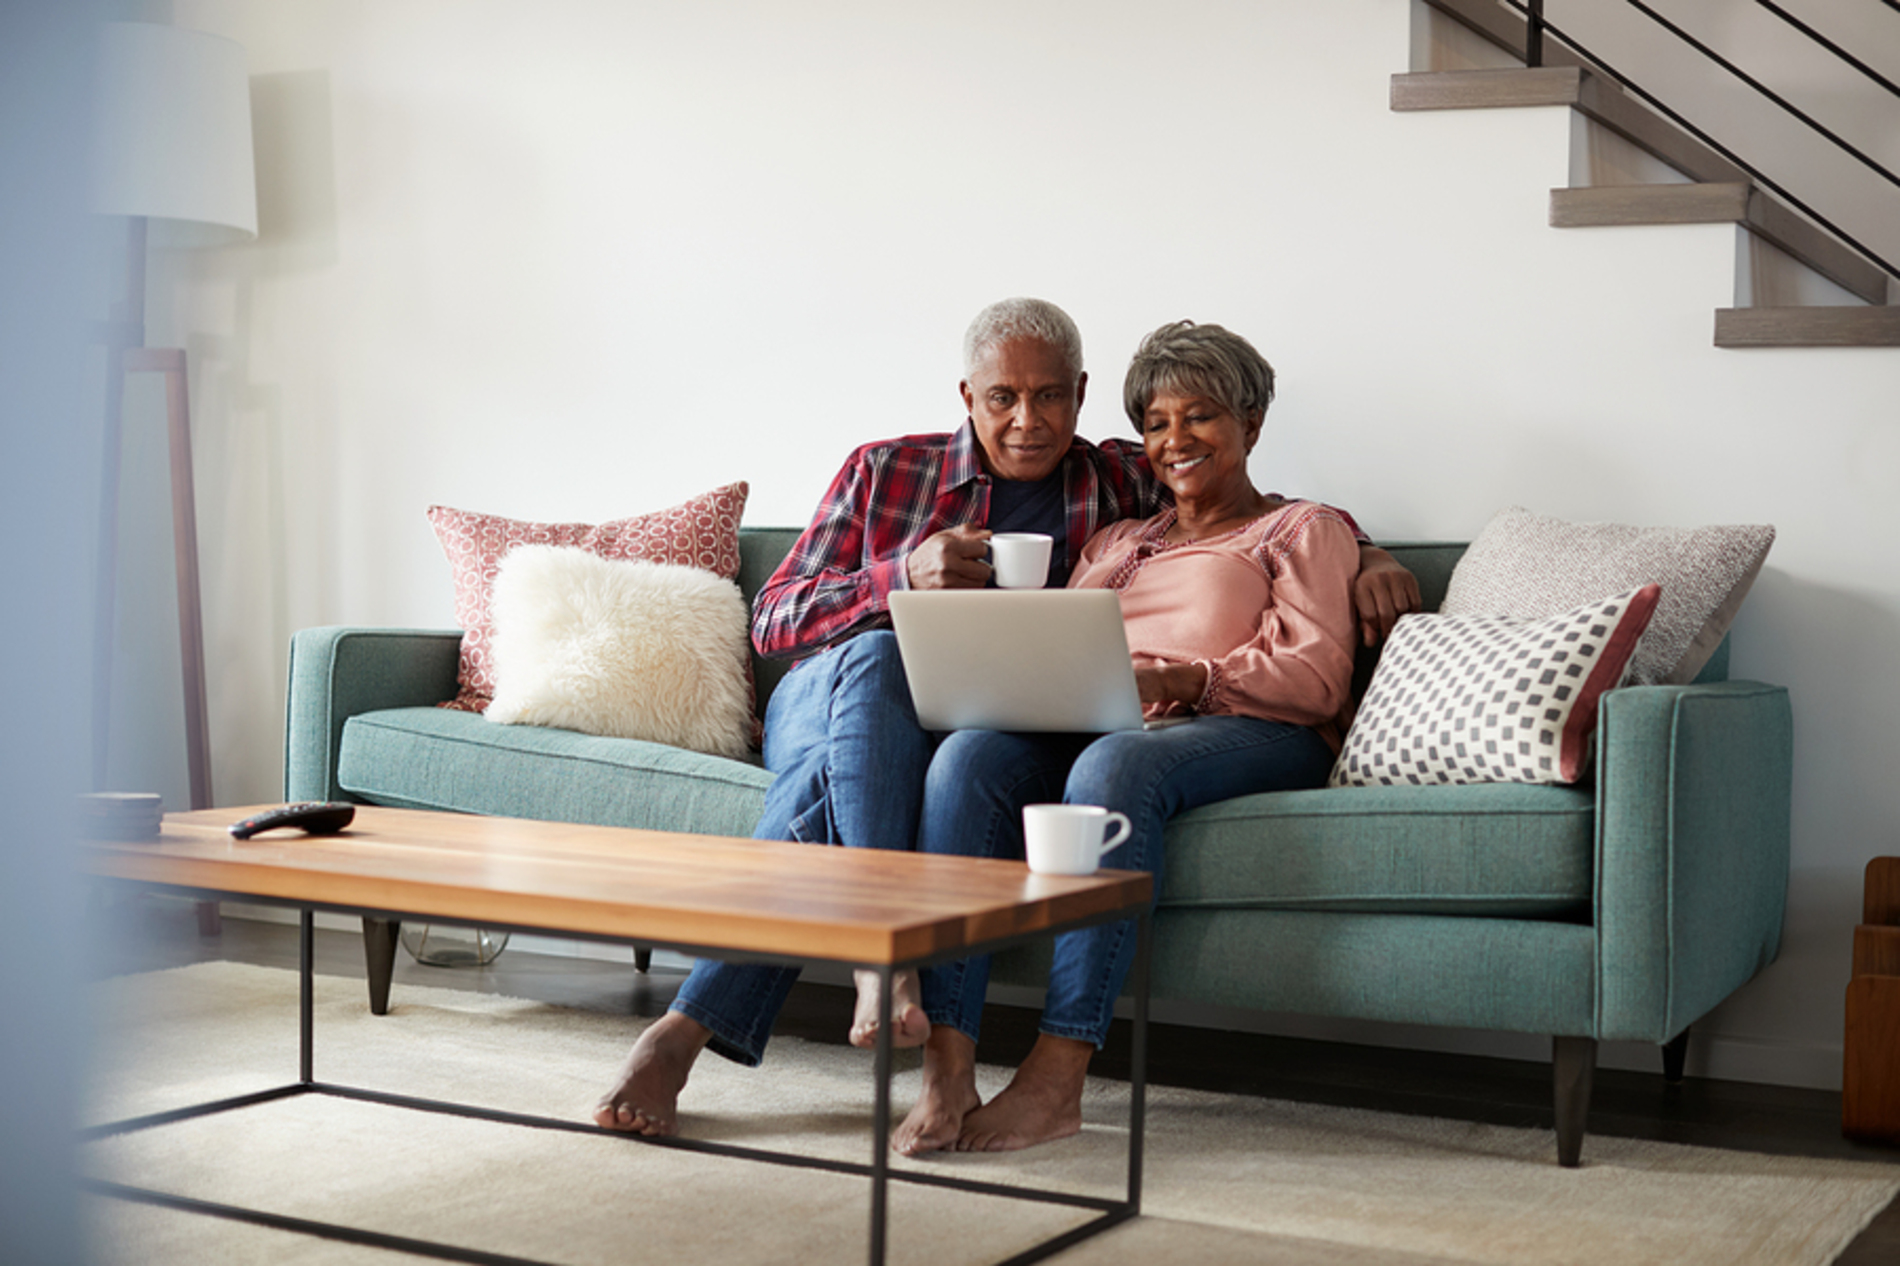 Older couple sitting on a couch looking at a laptop.